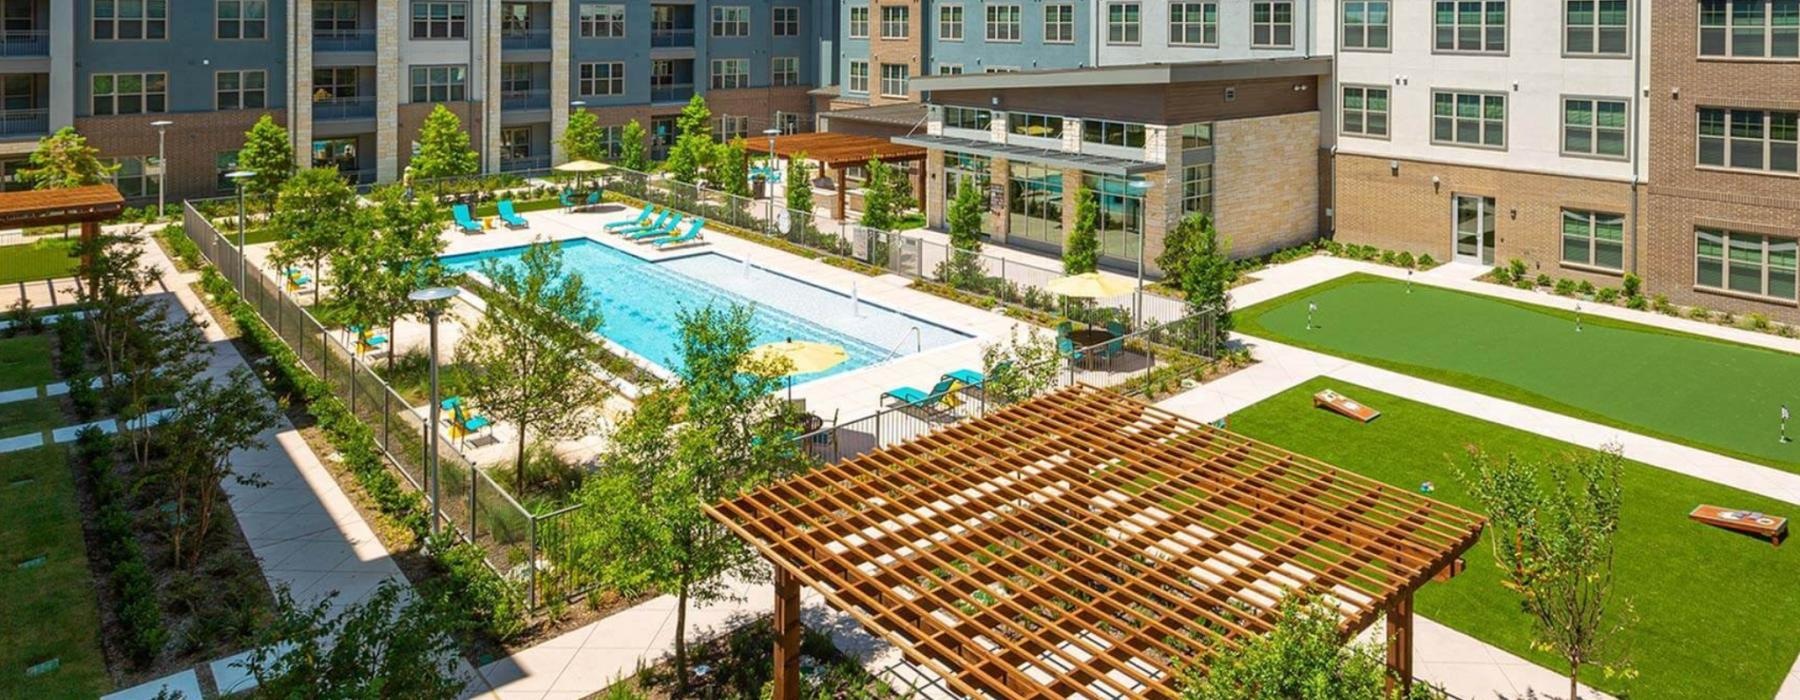 The courtyard and outdoor lounges at our 55 and over apartments in Plano, TX, featuring a luxury pool area.